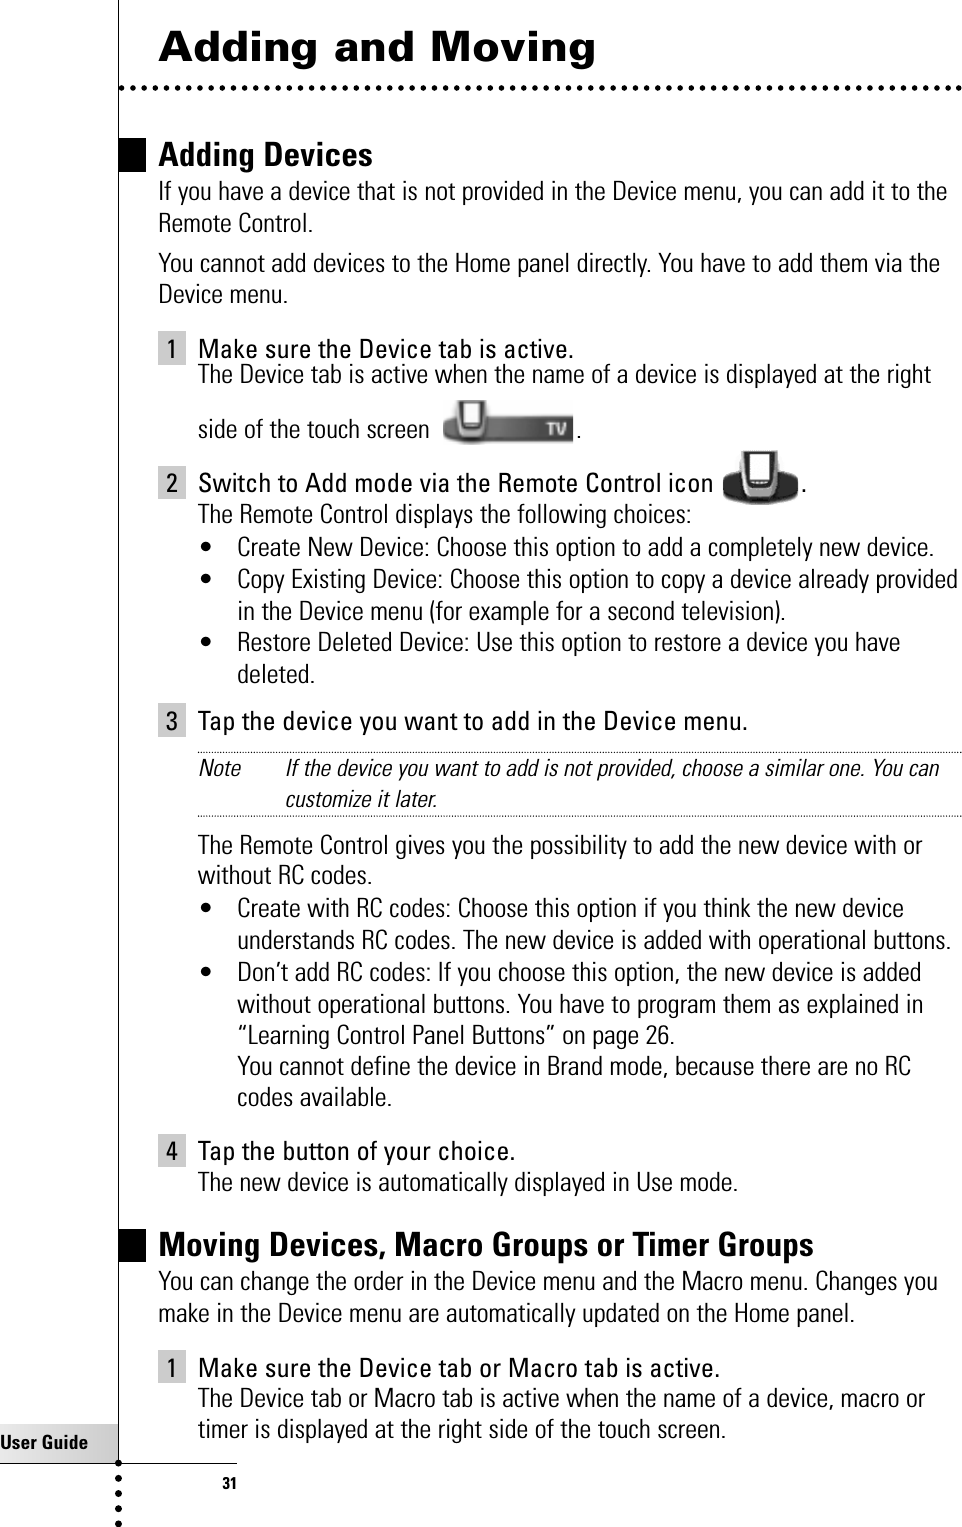 User Guide31Adding and MovingAdding DevicesIf you have a device that is not provided in the Device menu, you can add it to theRemote Control.You cannot add devices to the Home panel directly. You have to add them via theDevice menu.1 Make sure the Device tab is active.The Device tab is active when the name of a device is displayed at the rightside of the touch screen  .2 Switch to Add mode via the Remote Control icon  .The Remote Control displays the following choices:• Create New Device: Choose this option to add a completely new device.• Copy Existing Device: Choose this option to copy a device already providedin the Device menu (for example for a second television).• Restore Deleted Device: Use this option to restore a device you havedeleted.3 Tap the device you want to add in the Device menu.Note If the device you want to add is not provided, choose a similar one. You cancustomize it later.The Remote Control gives you the possibility to add the new device with orwithout RC codes.• Create with RC codes: Choose this option if you think the new deviceunderstands RC codes. The new device is added with operational buttons.• Don’t add RC codes: If you choose this option, the new device is addedwithout operational buttons. You have to program them as explained in“Learning Control Panel Buttons” on page 26.You cannot define the device in Brand mode, because there are no RCcodes available.4 Tap the button of your choice.The new device is automatically displayed in Use mode.Moving Devices, Macro Groups or Timer GroupsYou can change the order in the Device menu and the Macro menu. Changes youmake in the Device menu are automatically updated on the Home panel.1 Make sure the Device tab or Macro tab is active.The Device tab or Macro tab is active when the name of a device, macro ortimer is displayed at the right side of the touch screen.Getting the Maximum out of it